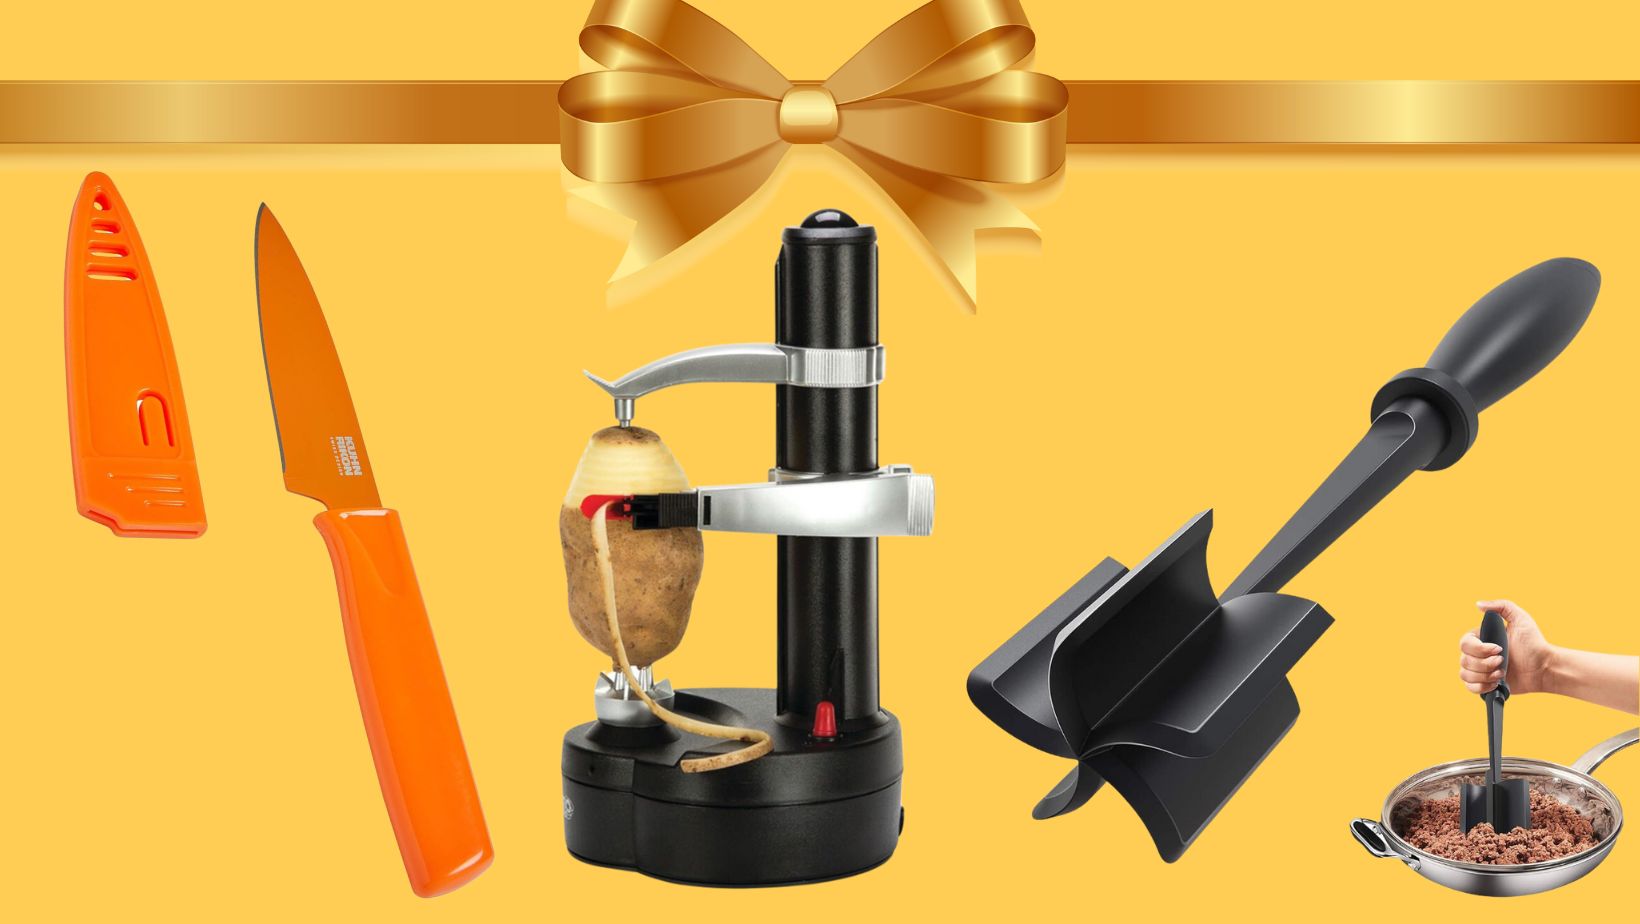 The Most Useful Kitchen Gifts — The Best Kitchen Tools, Gadgets, and Treats  | Apartment Therapy